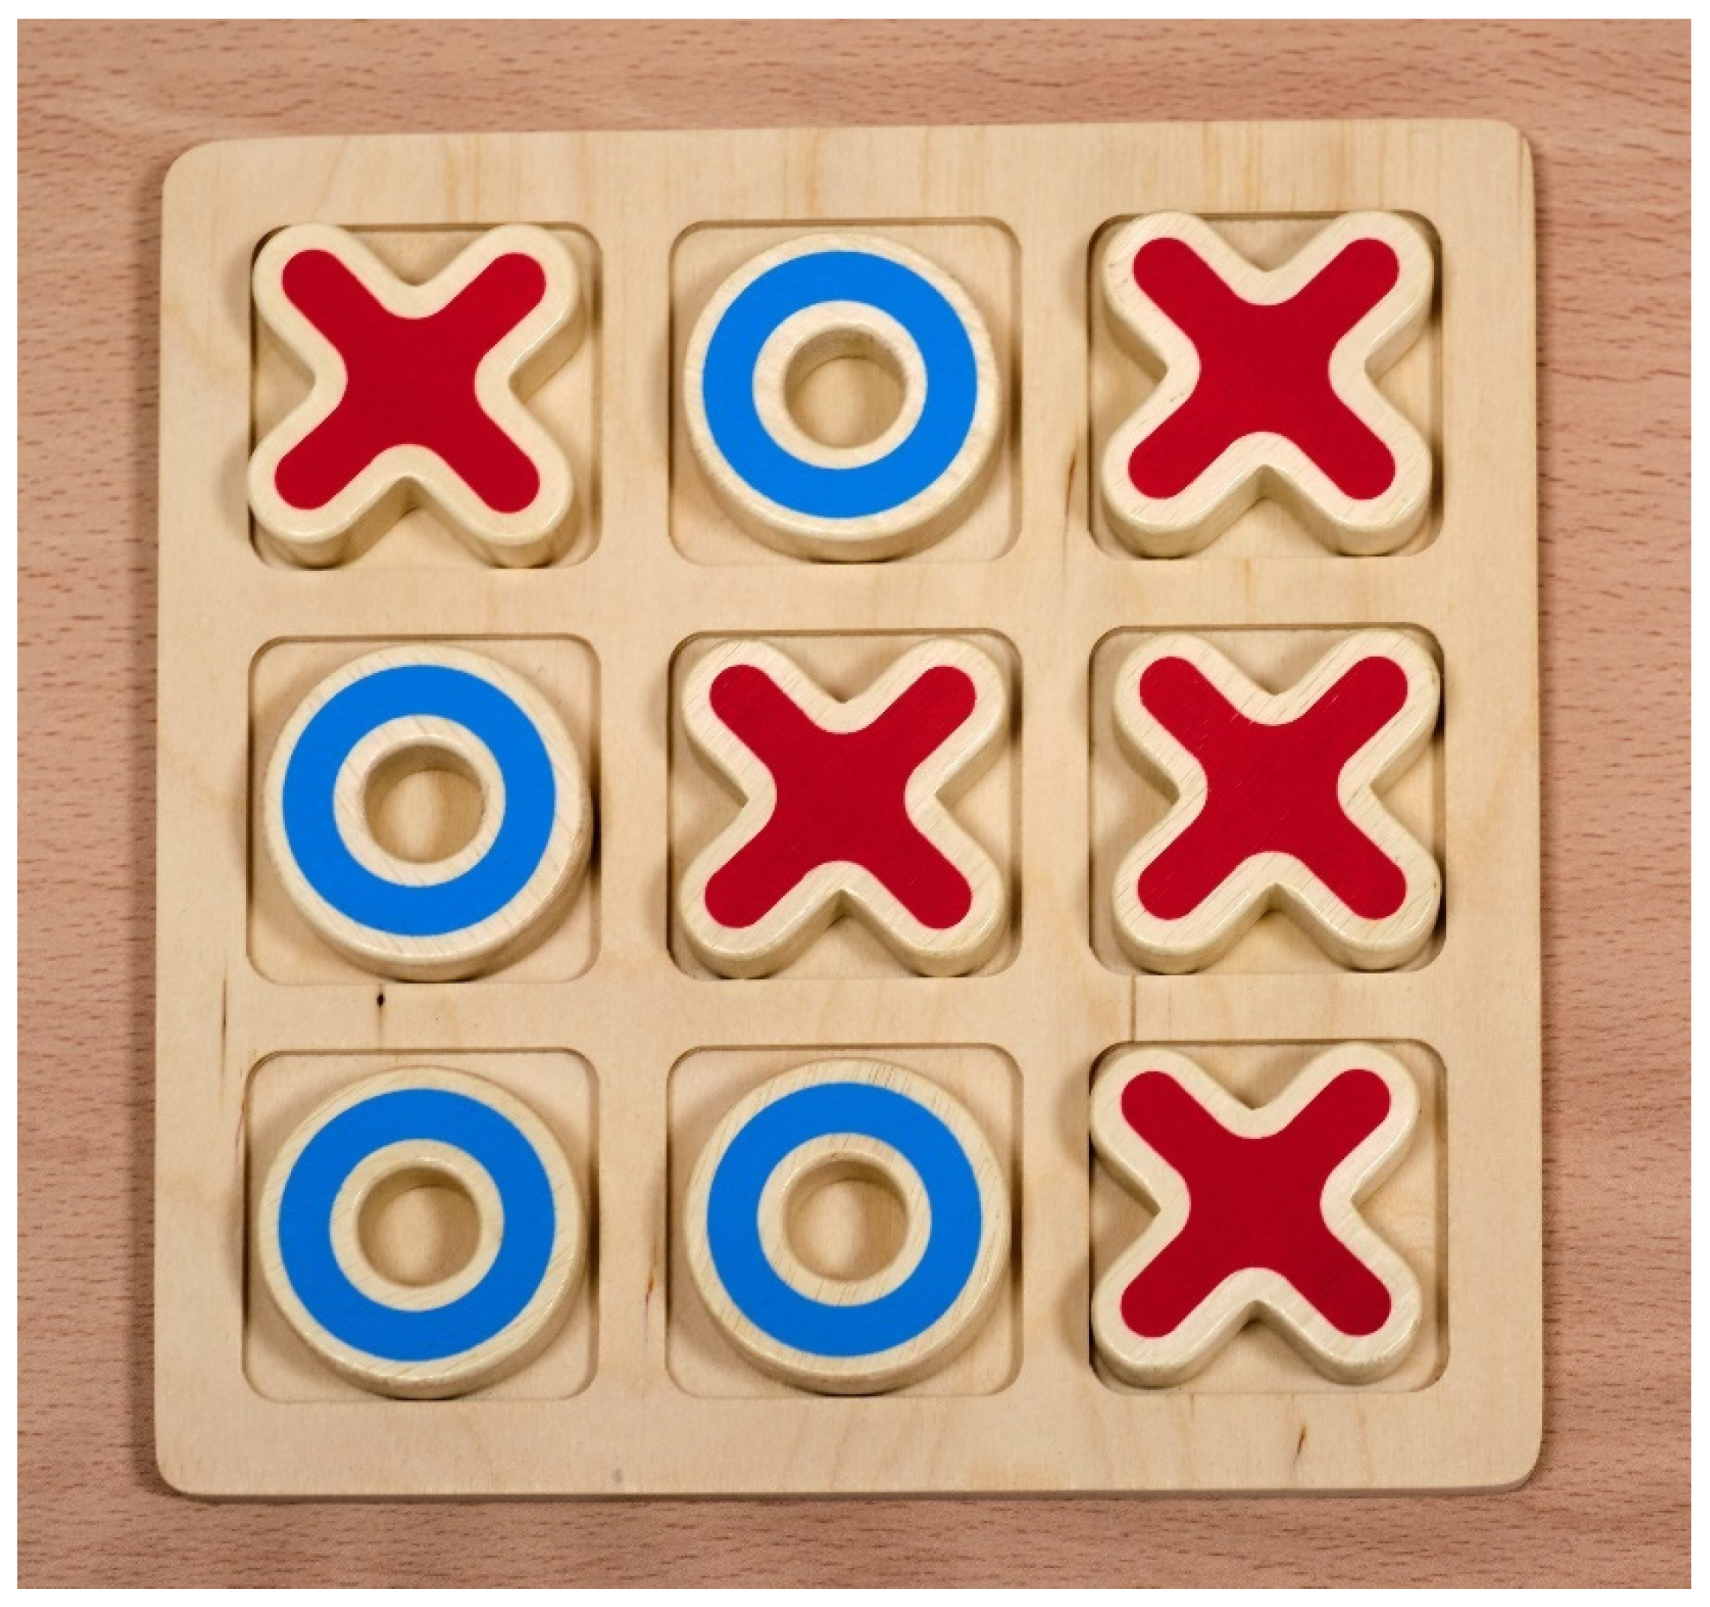 Never Lose at Tic-Tac-Toe: Winning Strategy and Tactics for